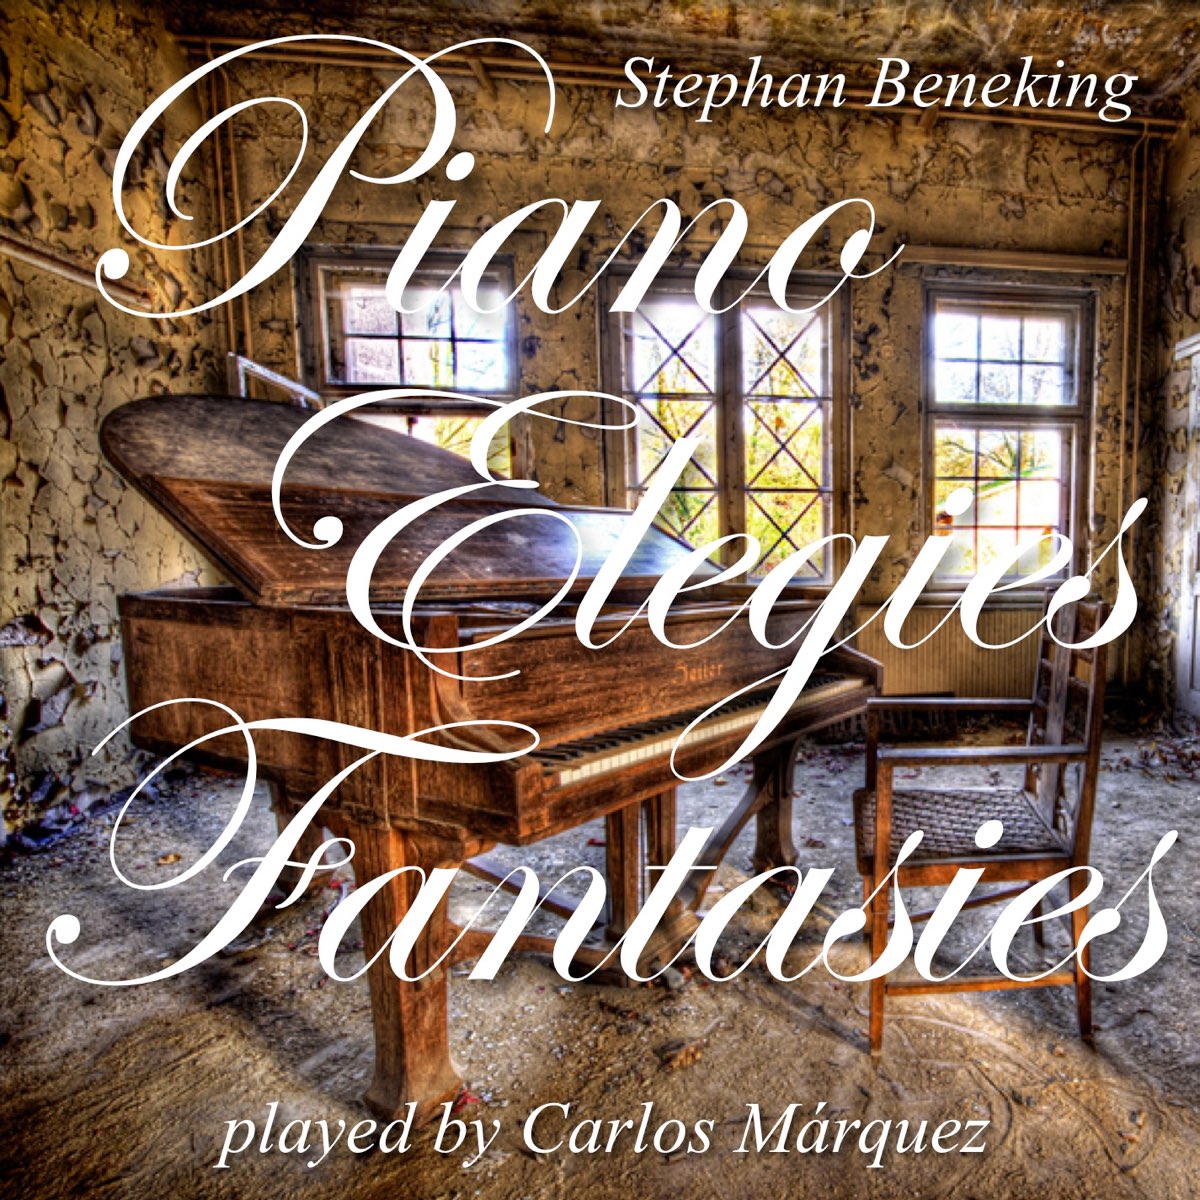 Piano Elegies and Fantasies - EP by Carlos Marquez on Apple Music